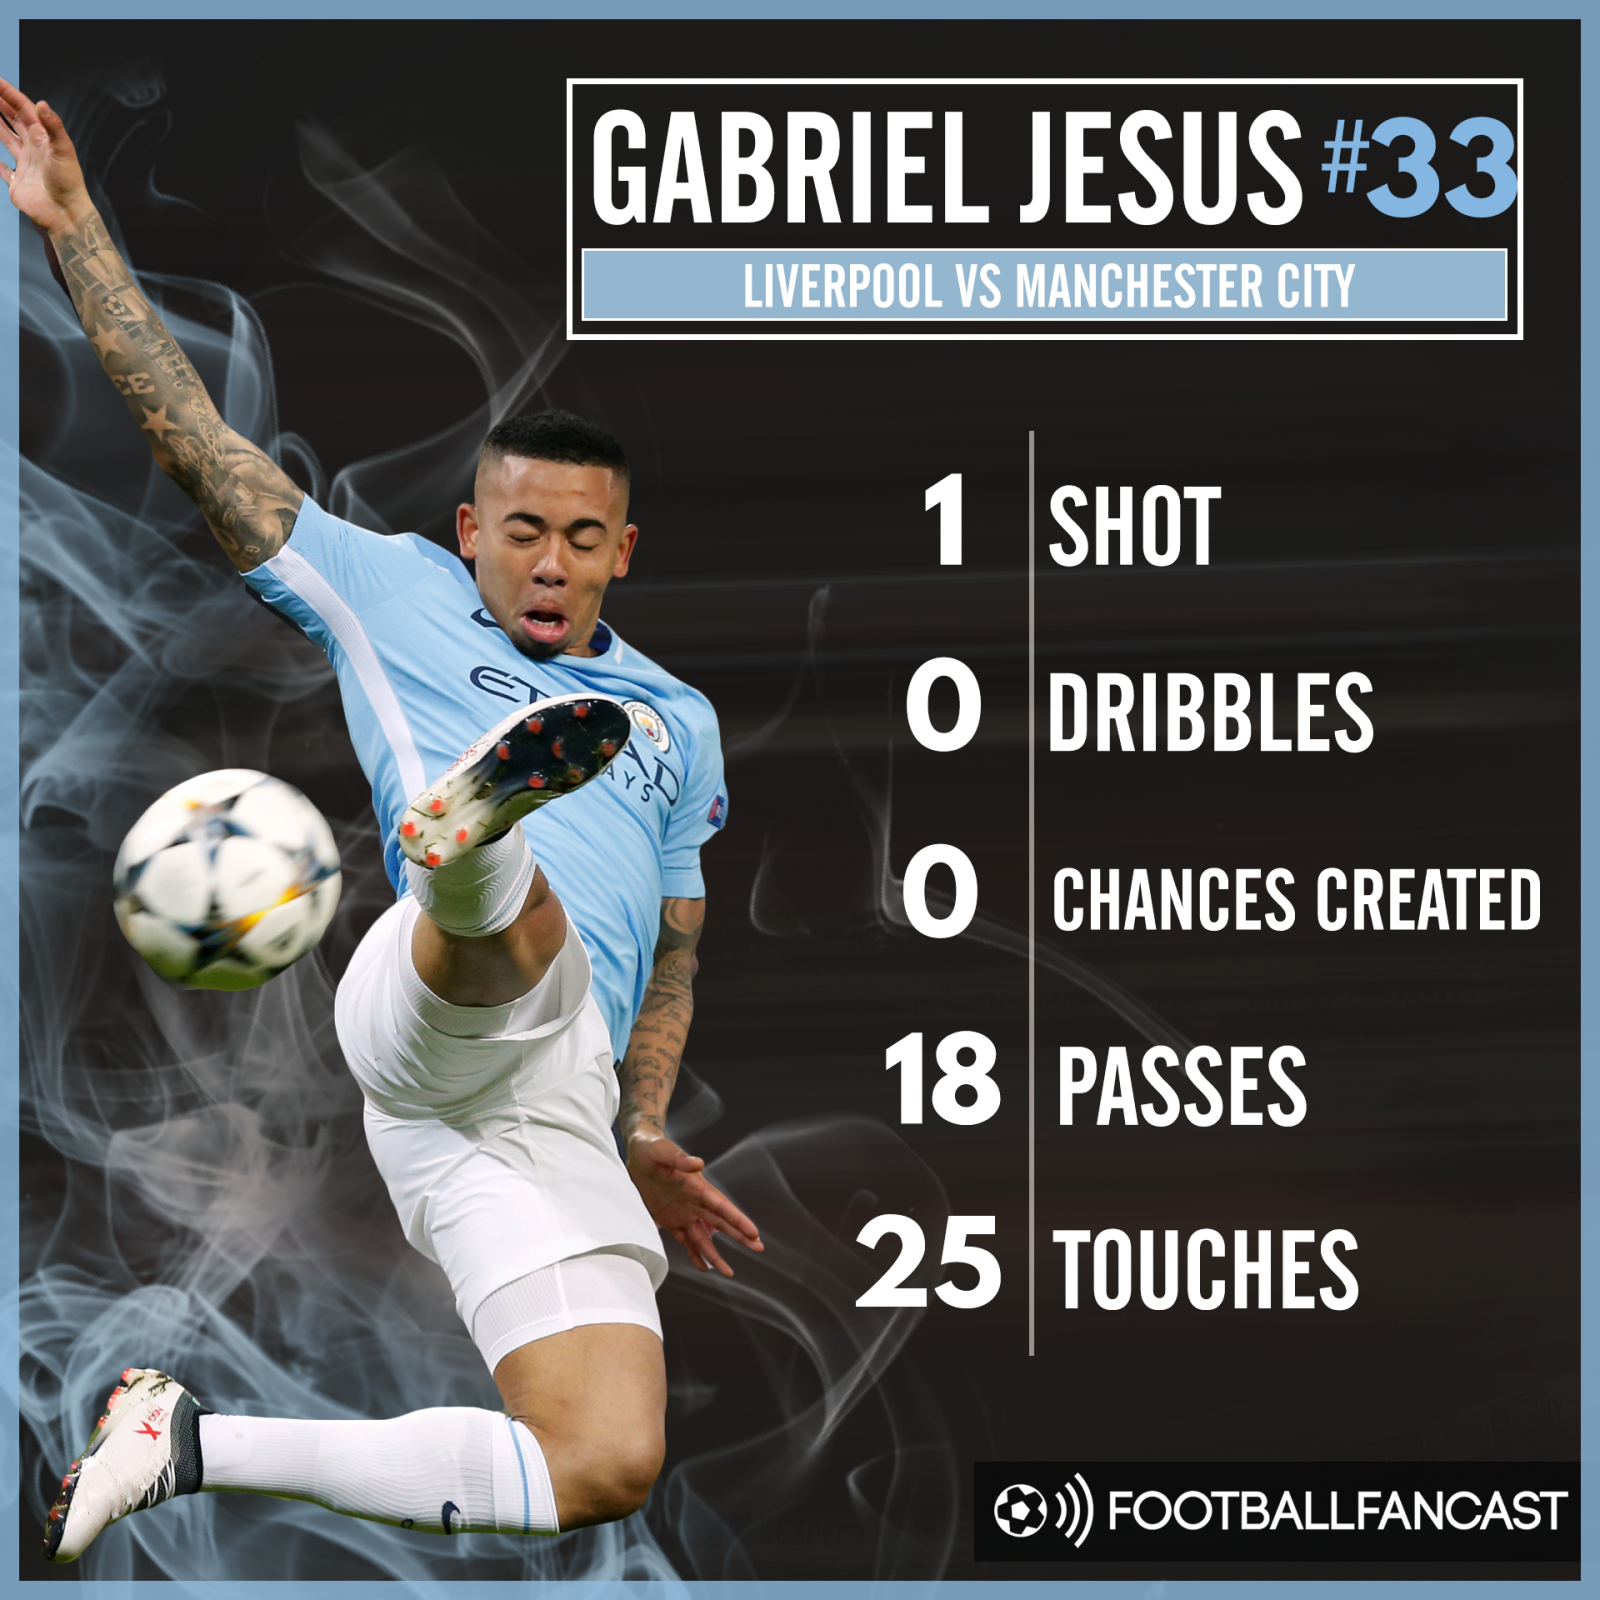 Gabriel Jesus' stats from Liverpool's 3-0 win over Manchester City